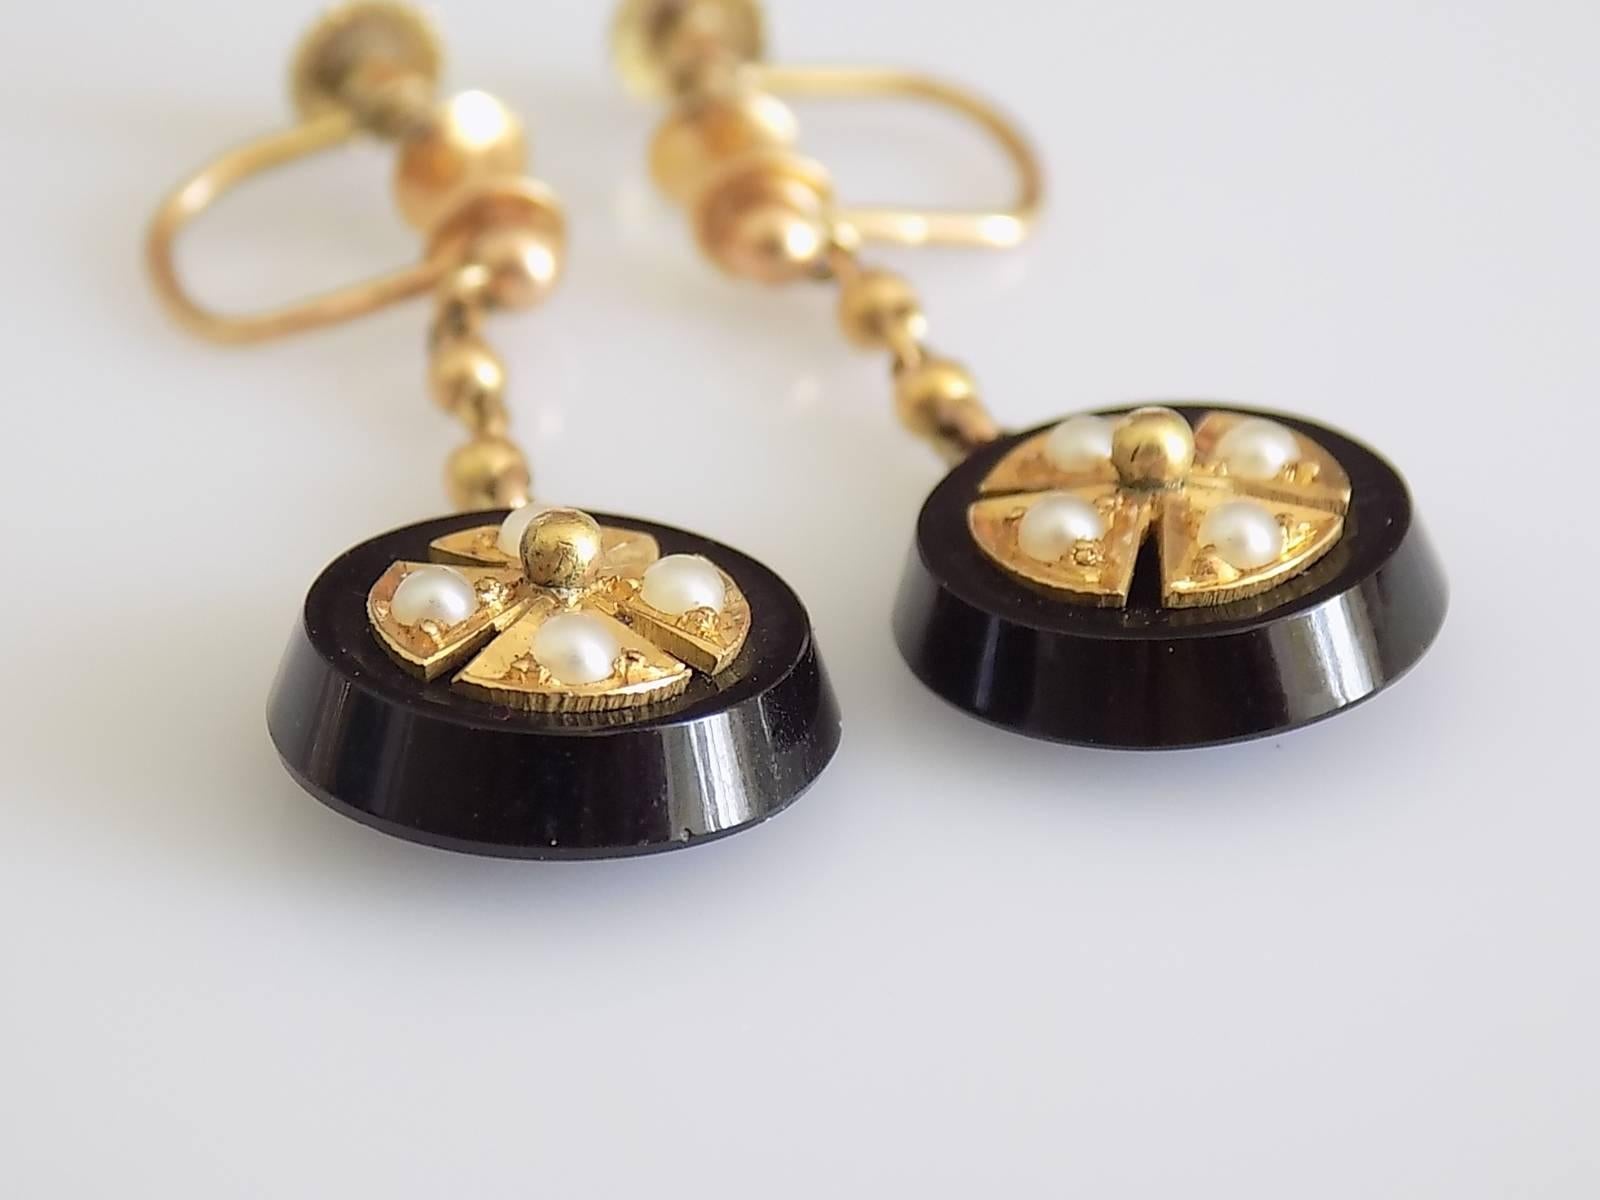 An Antique Victorian era 18 Carat Yellow Gold, Black Onyx and split Natural Seed Pearl Maltese cross Mourning drop earrings. Earrings complete with a working screw backs for unpierced ears.
Total drop 29mm, Width 13mm.
Weight 4.6gr.
Unmarked, tested